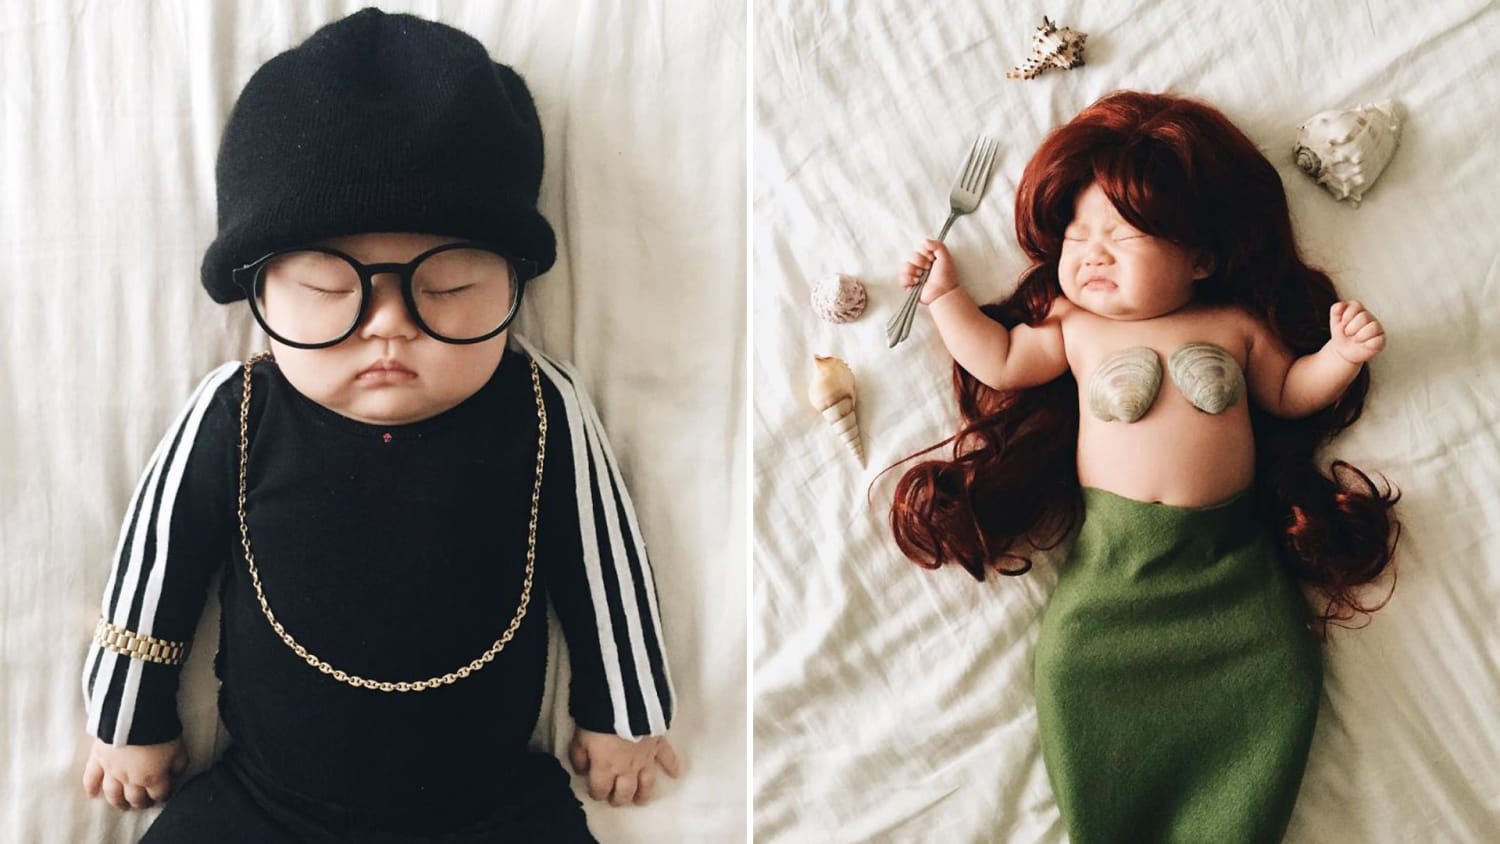 Mom dresses up baby while she naps, and the results are 